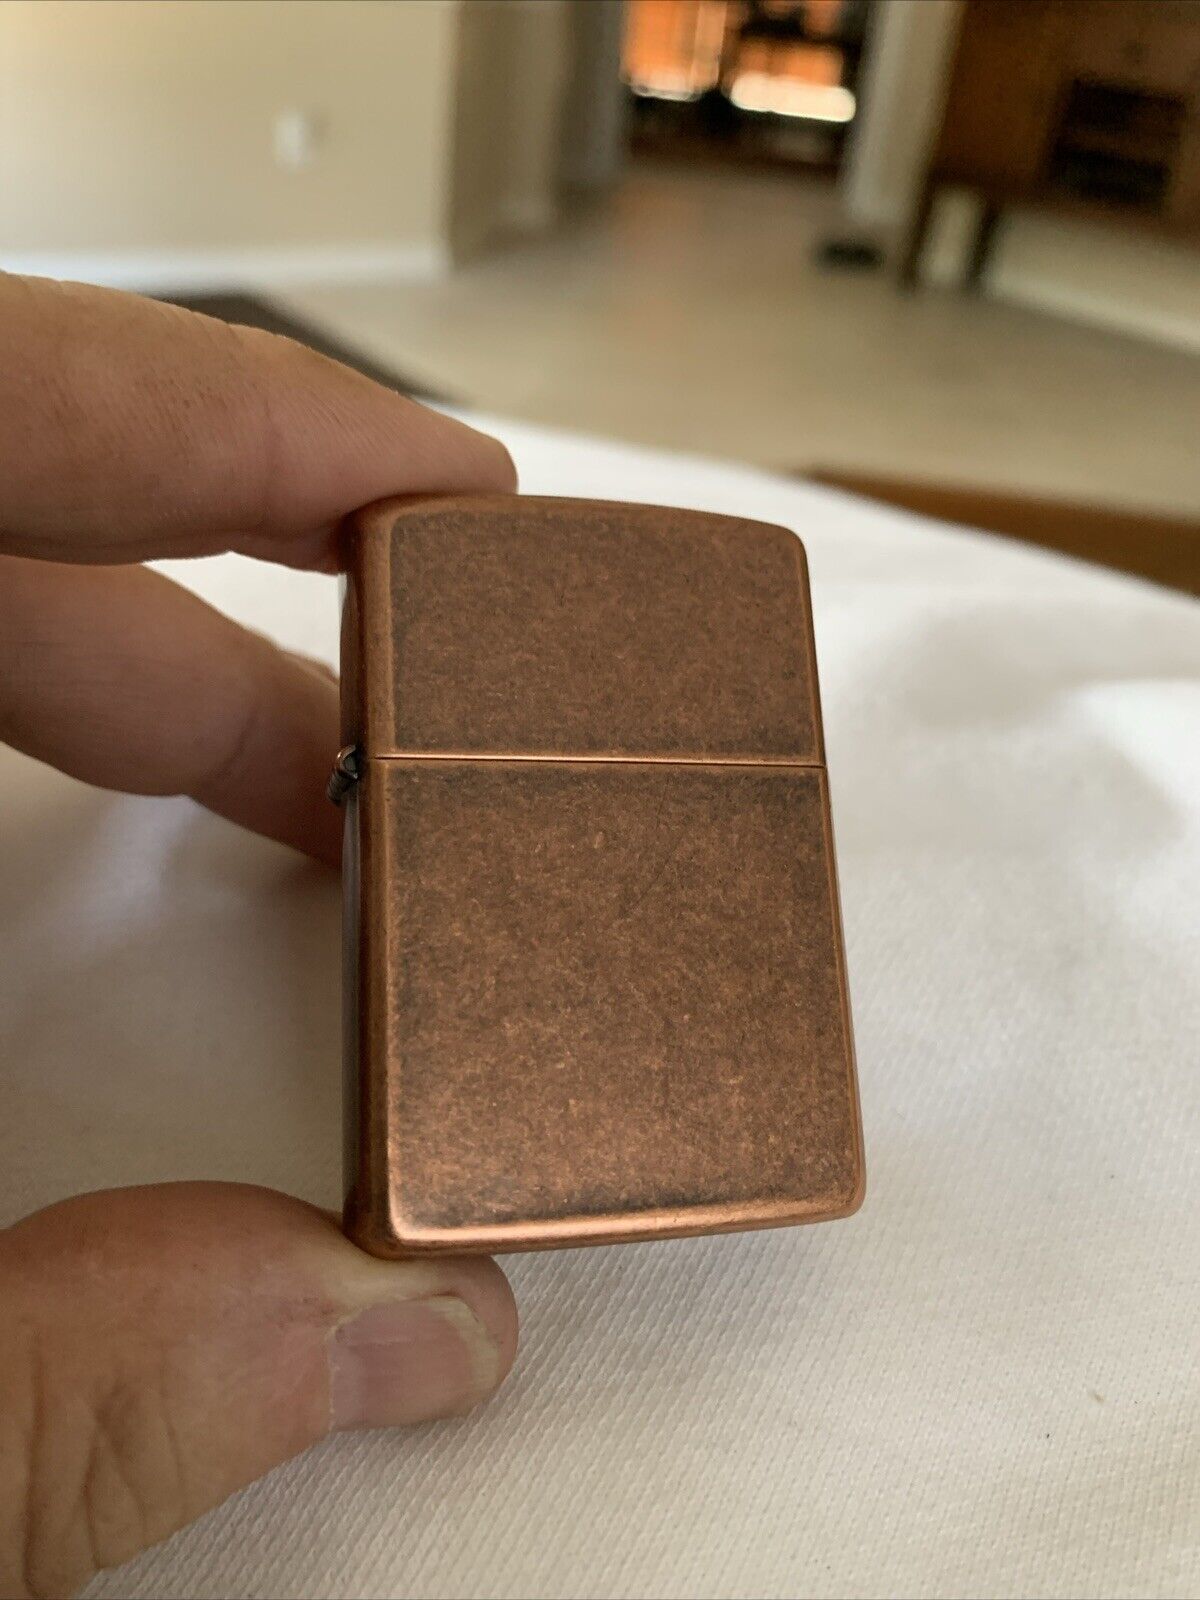 Zippo vintage lighter 1994 brushed copper Has a slight blemish on top of the cap